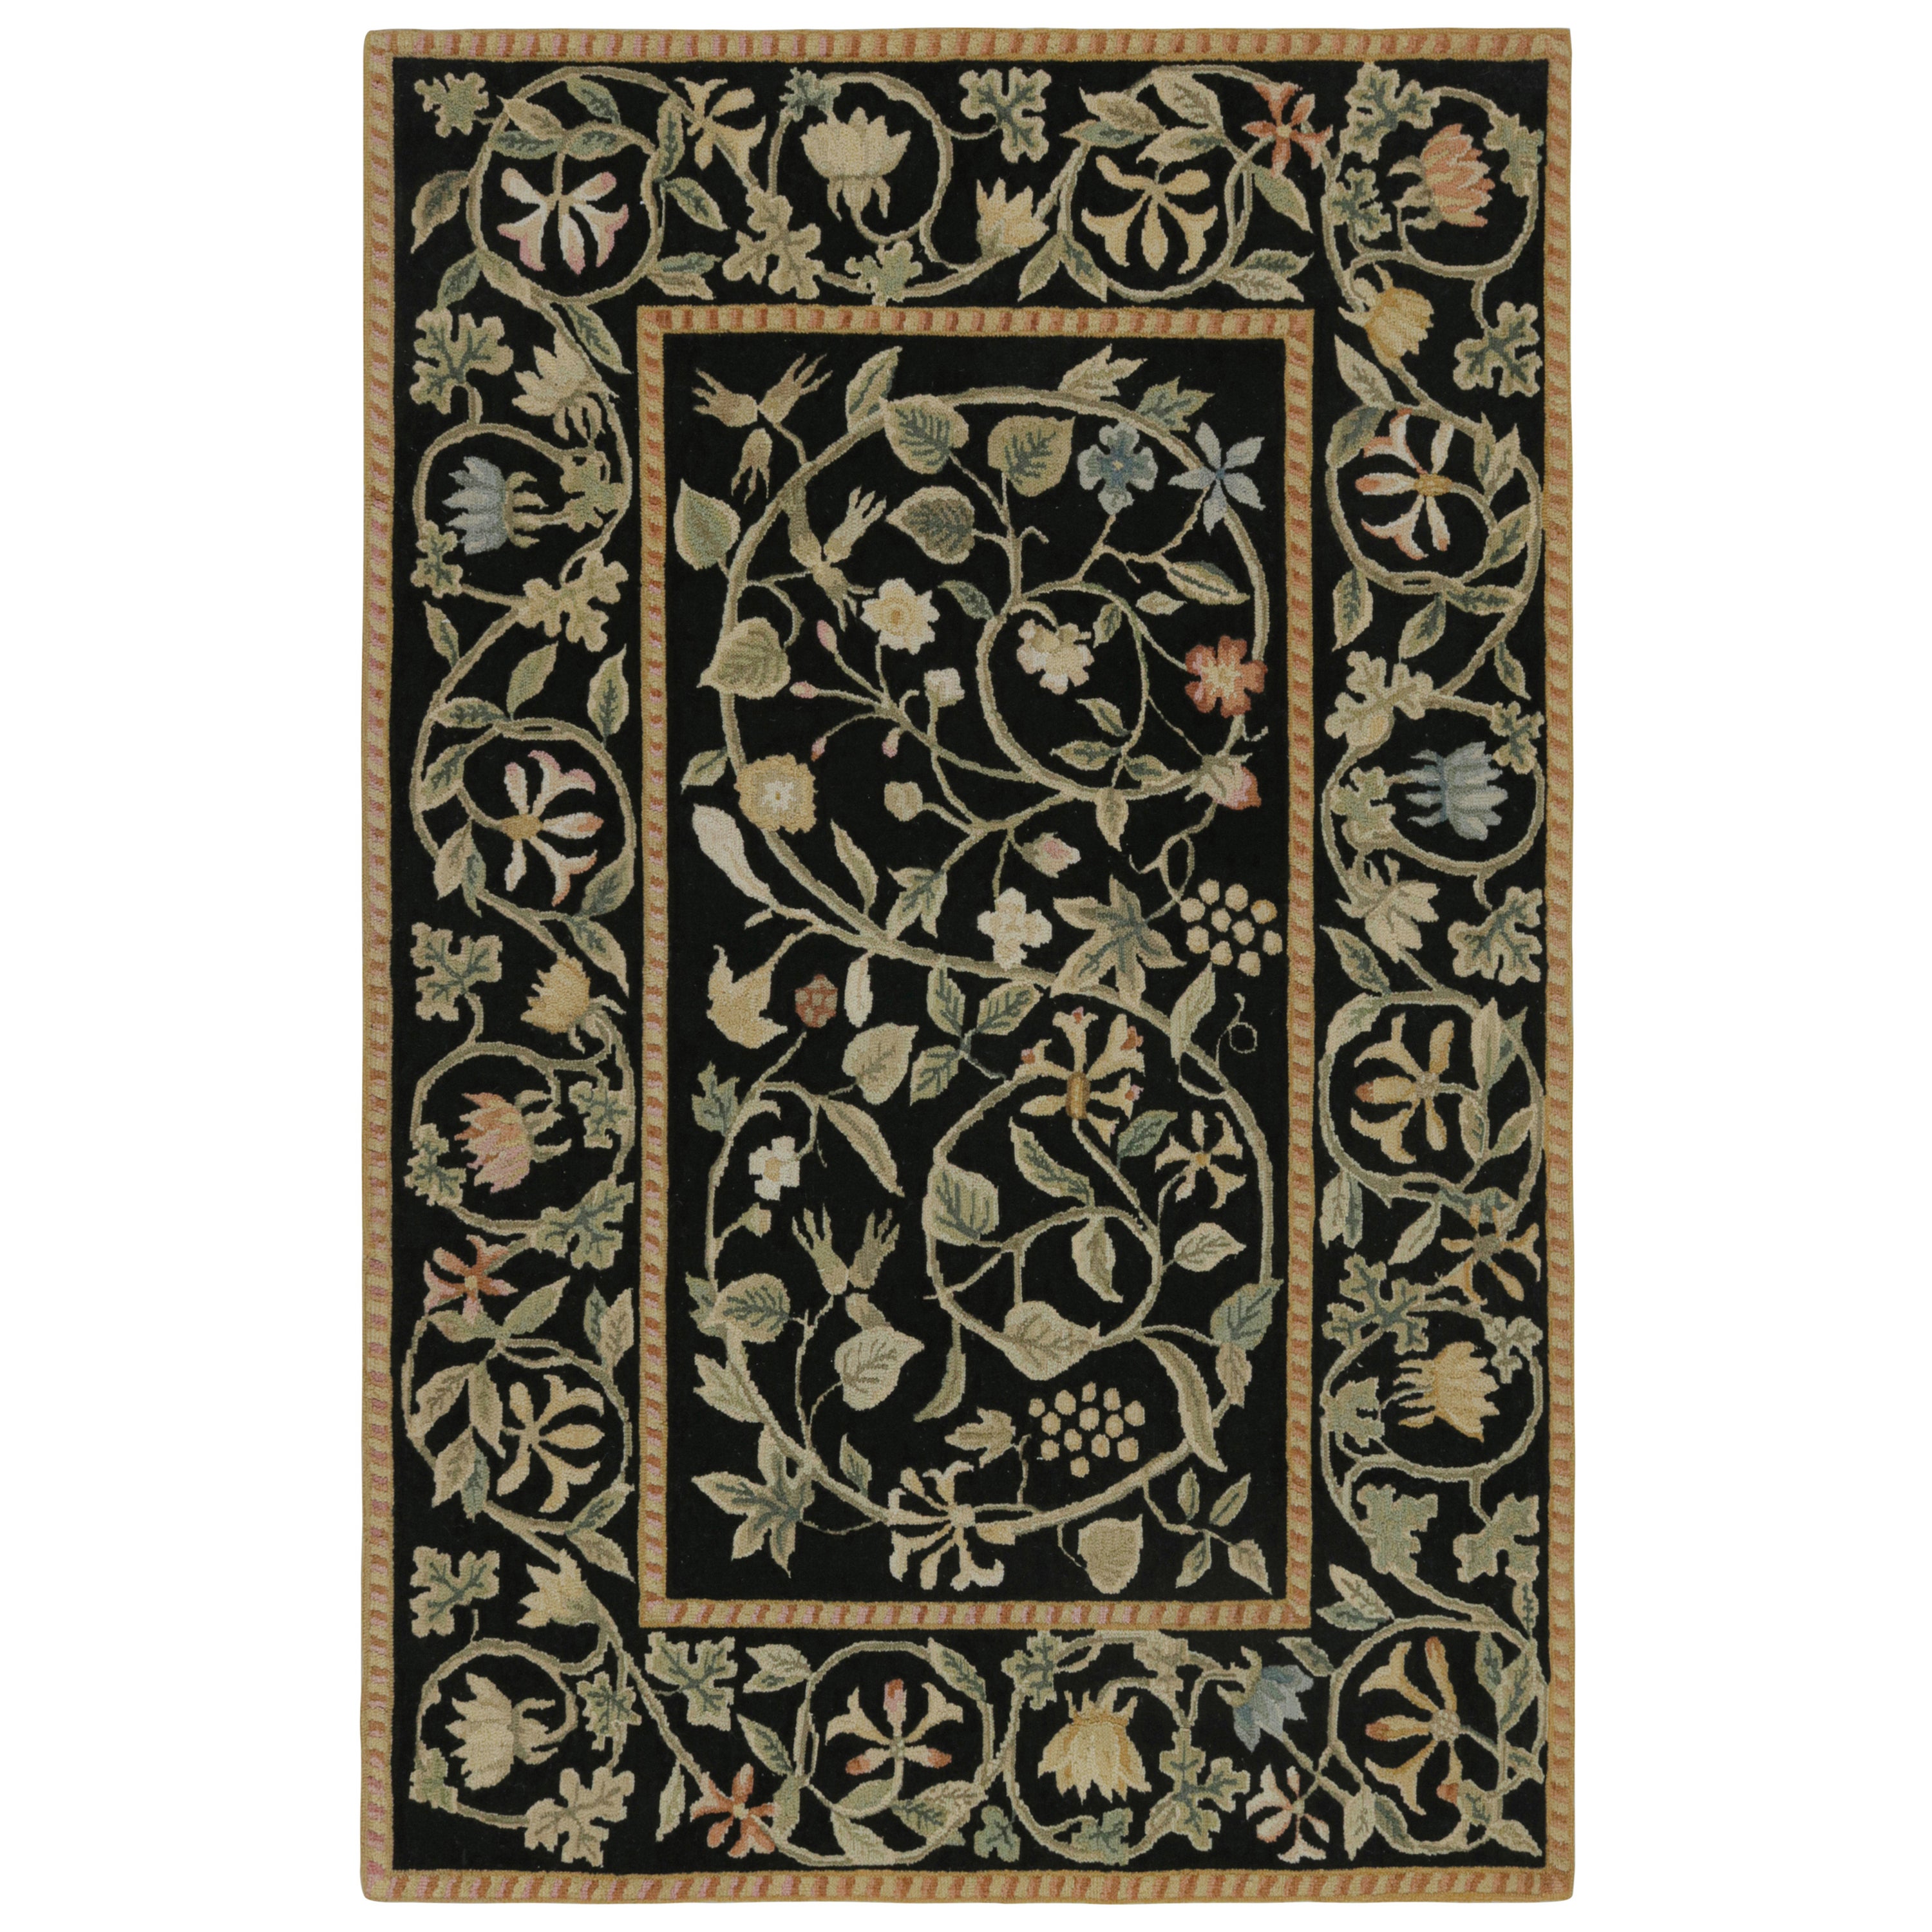 Rug & kilim’s European Style Rug in Black with Beige and Green Floral Patterns For Sale